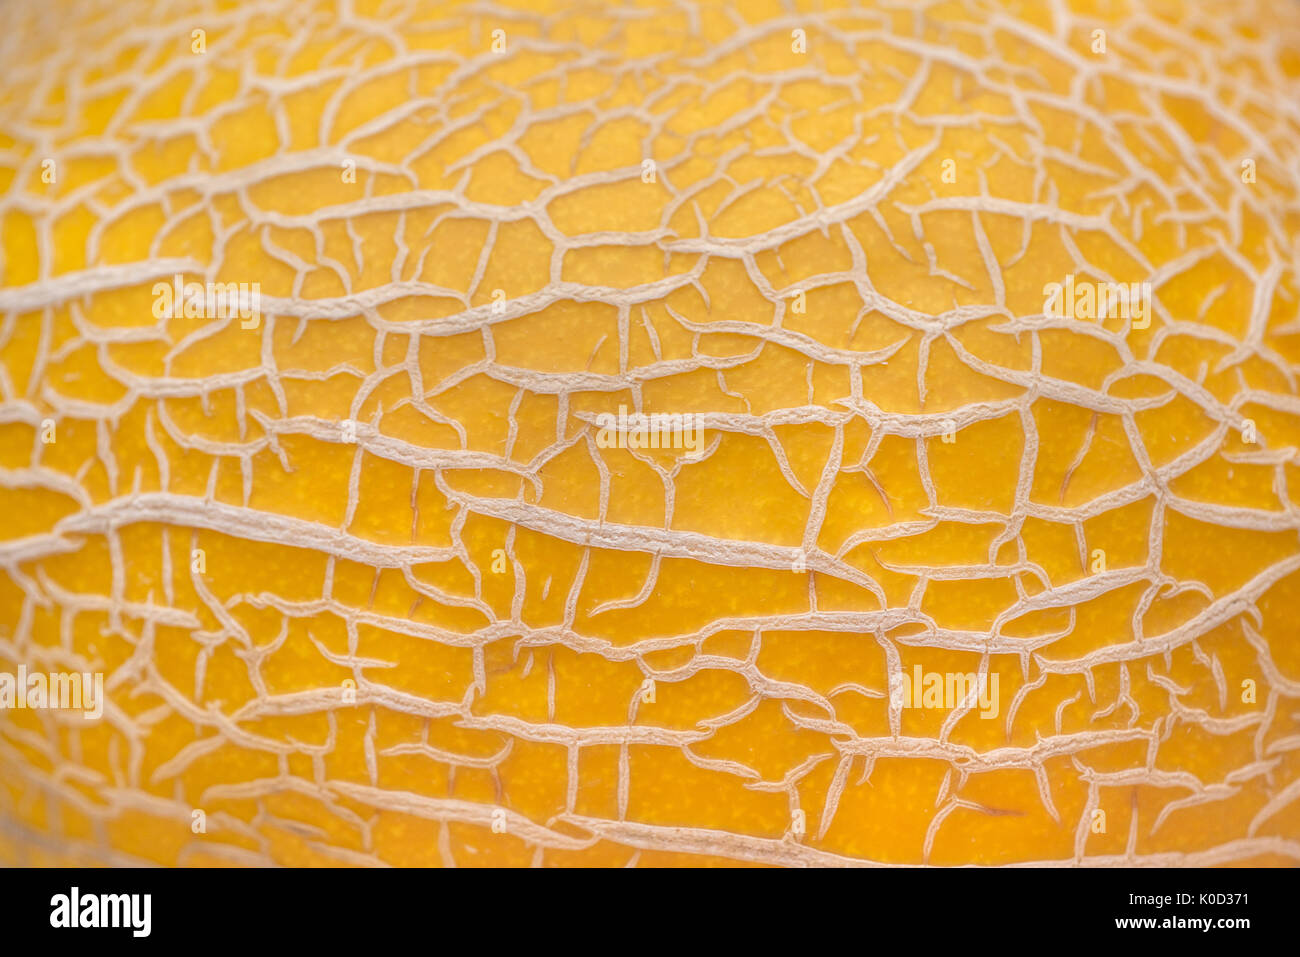 Close up shot of yellow melon's skin with fibers Stock Photo